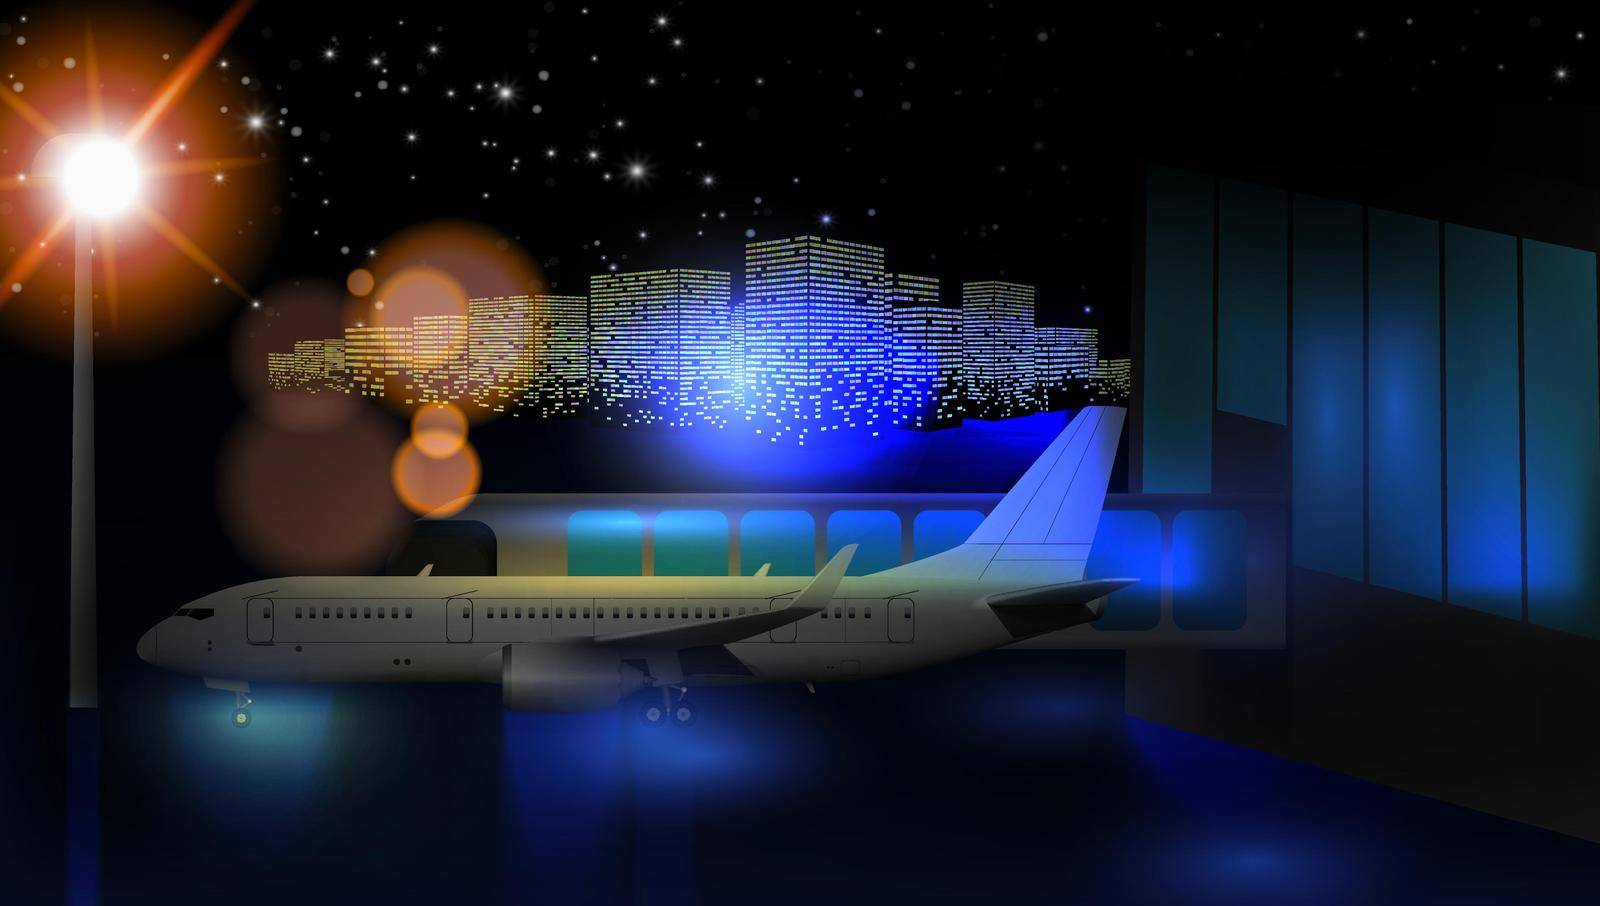 Night View Of The Airport Passenger Airplanes Terminal. EPS10 Vector